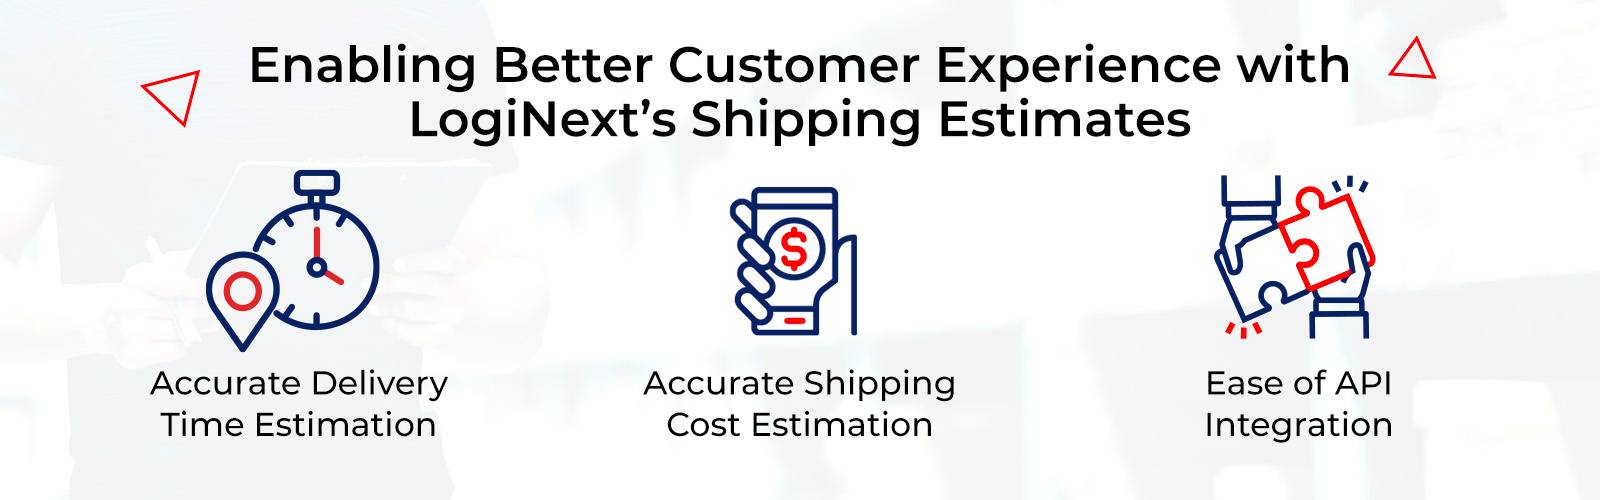 LogiNext's Shipping Estimates benefits with better customer experience